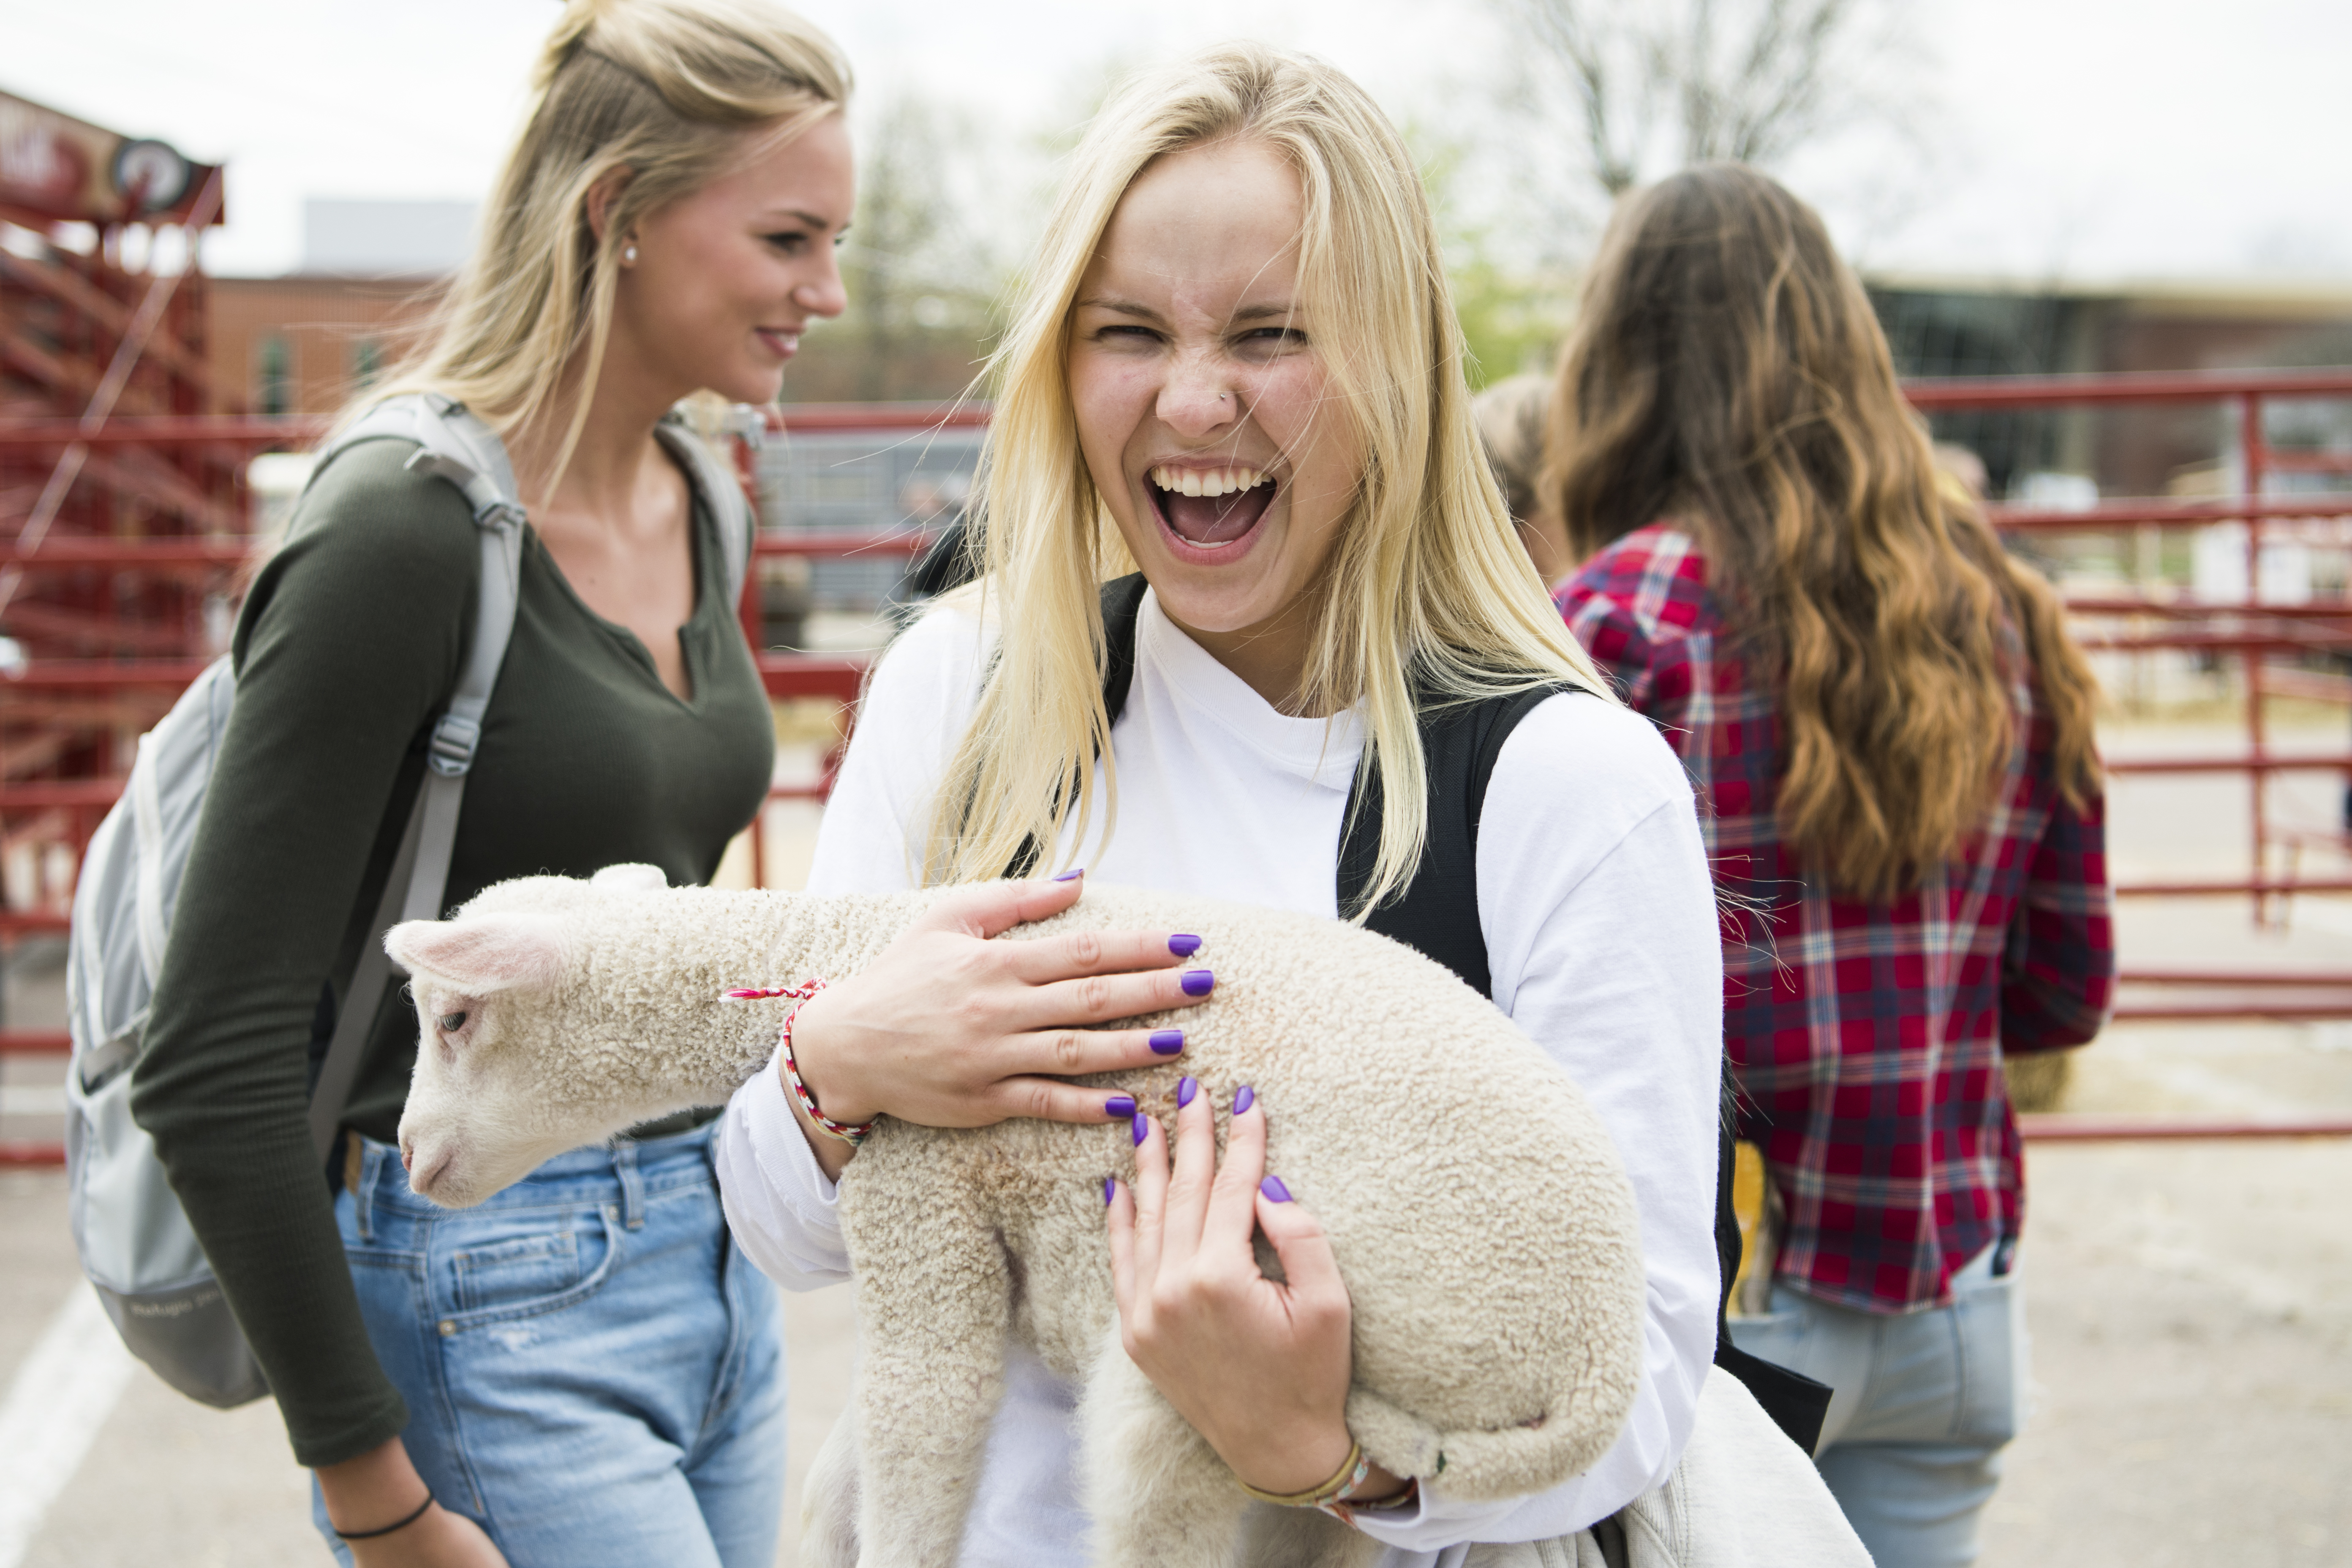 A female student smiles while holding a lamb